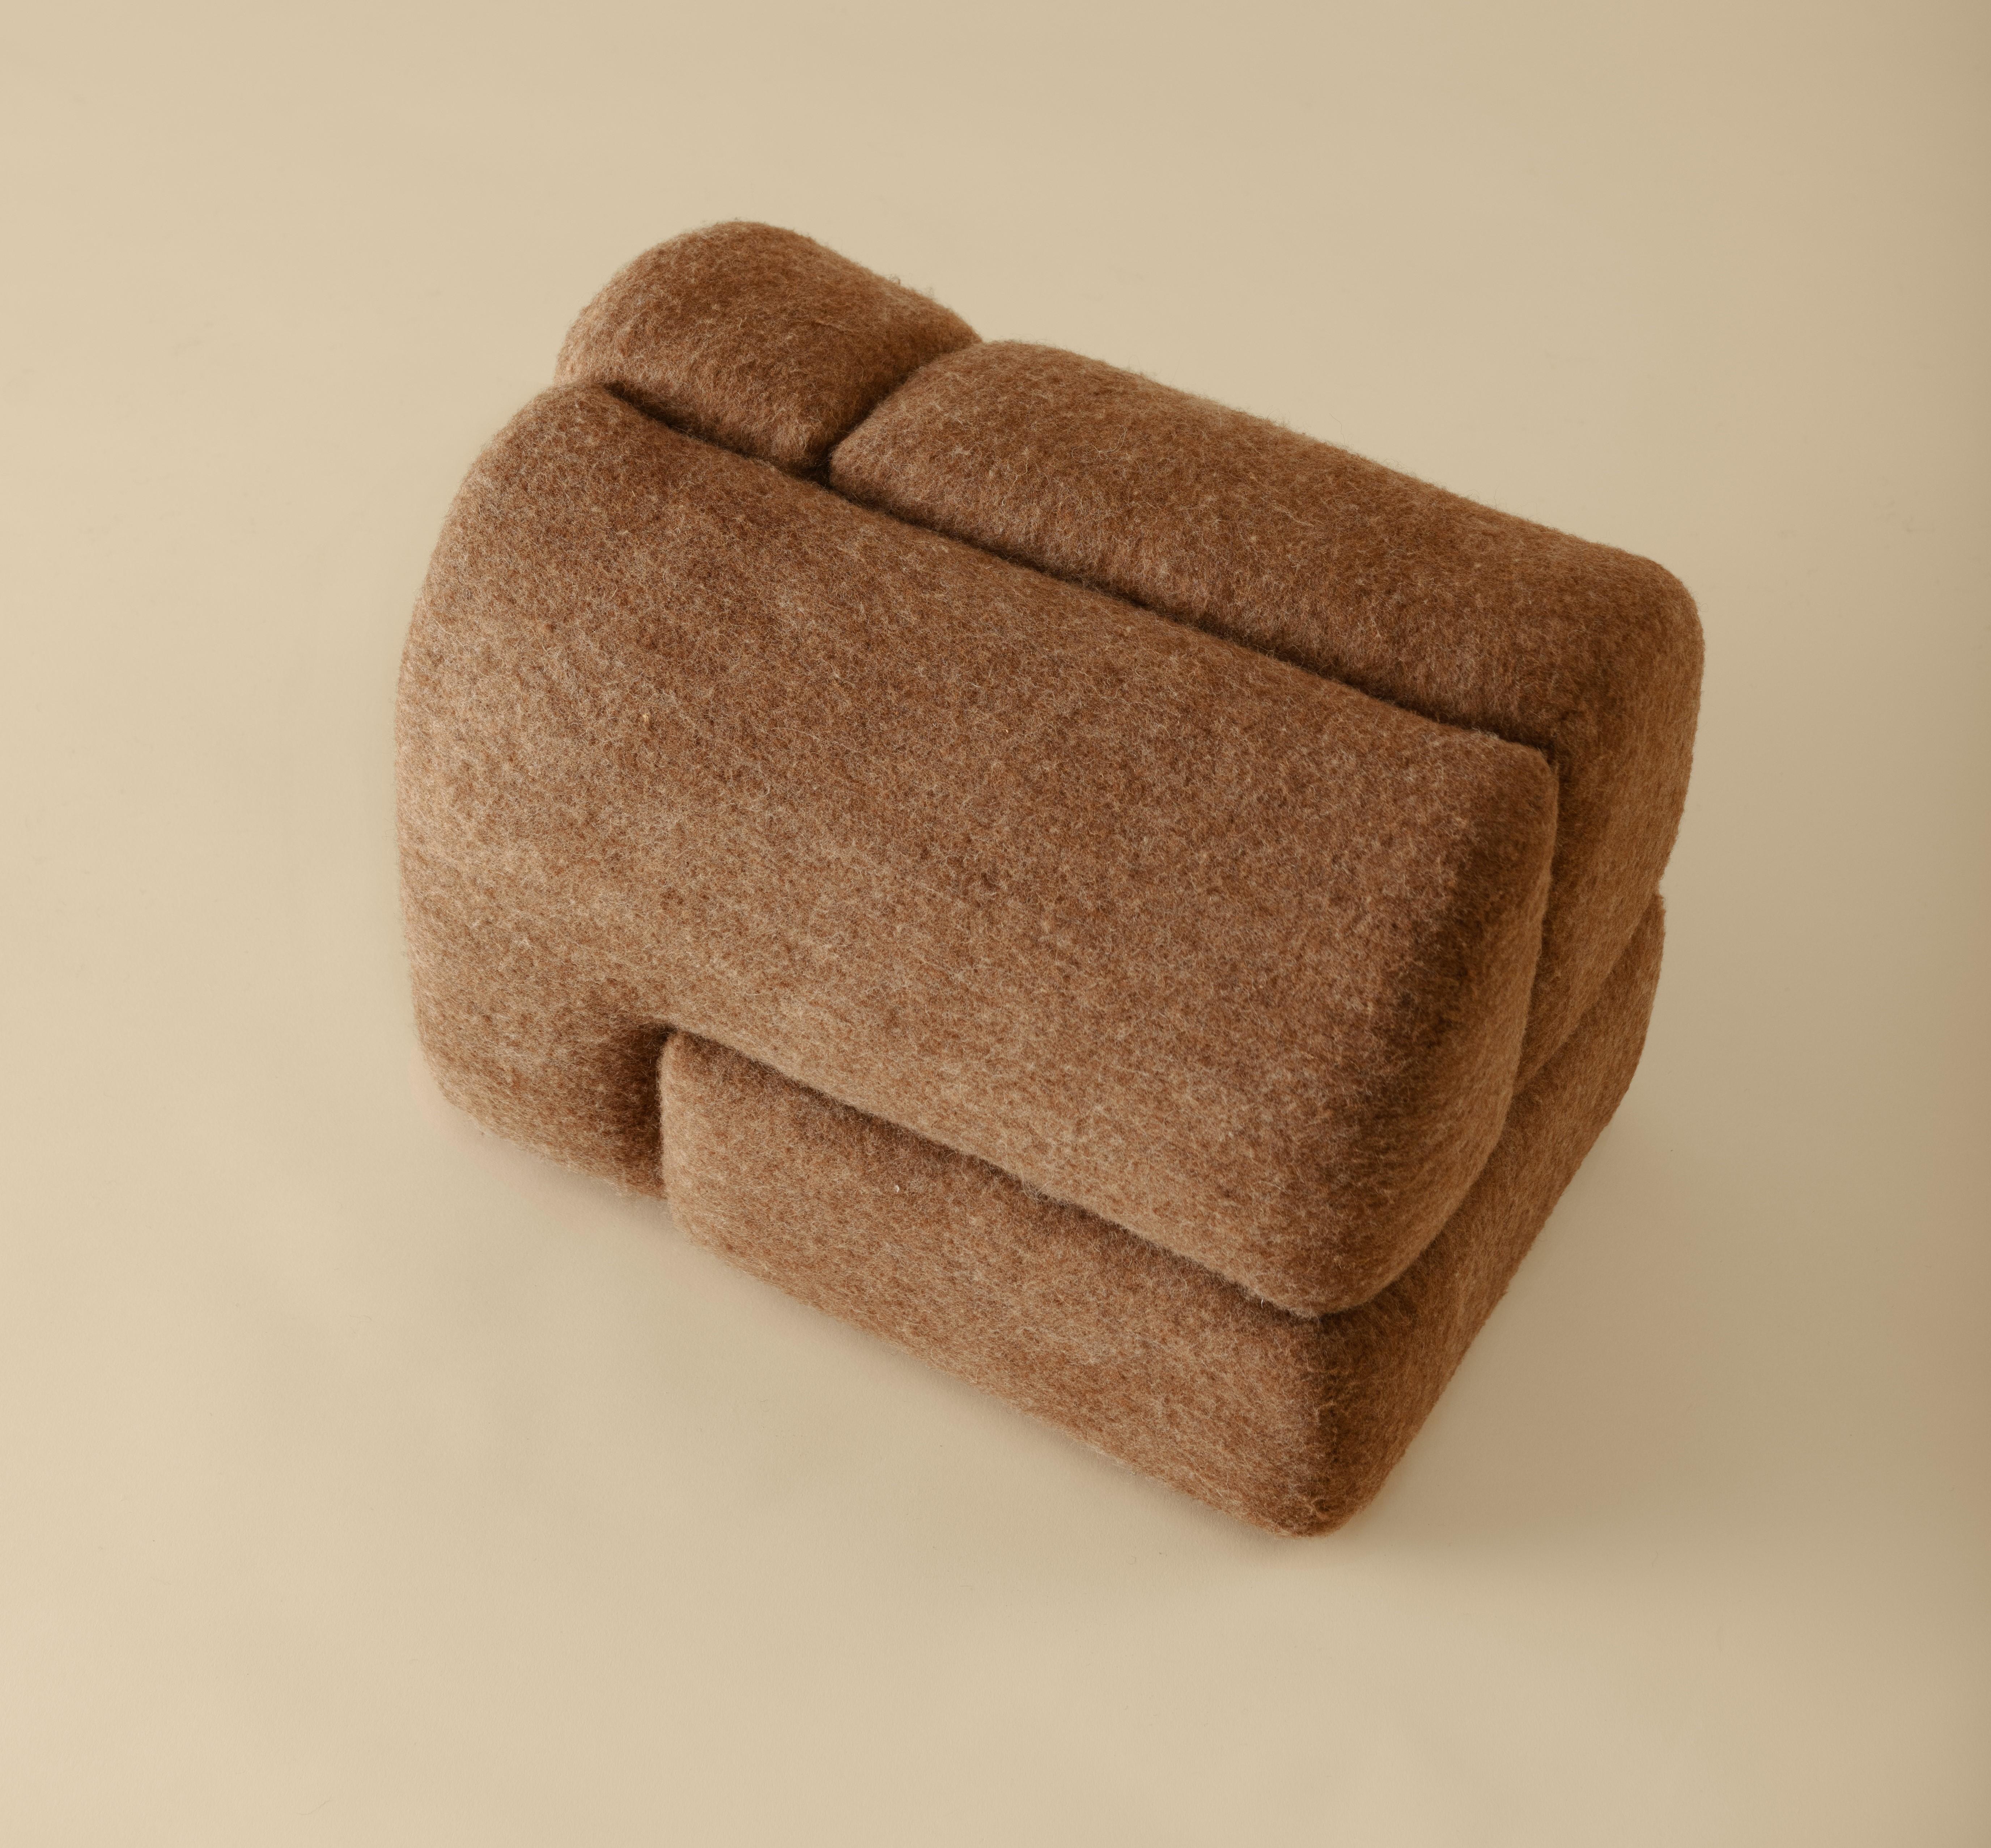 Sheep stool designed by Studio Ahead. The stool is upholstered in custom cream merino wool felt from Northern California sheep 
The stool could be placed on either side horizontally or vertically. Each side design is unique. Designed and fabricated